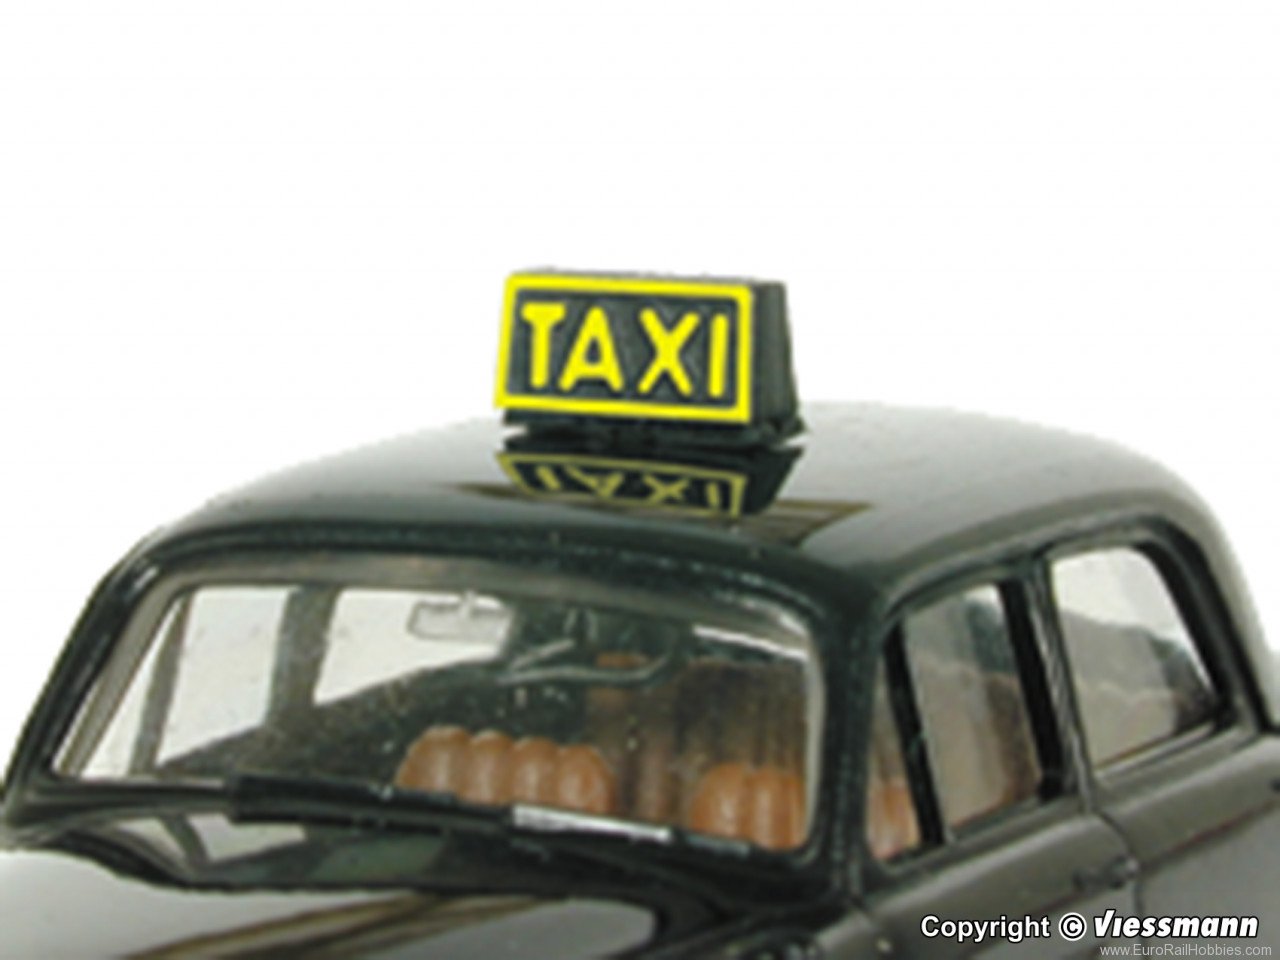 Viessmann 5039 HO Taxi sign with LED lighting